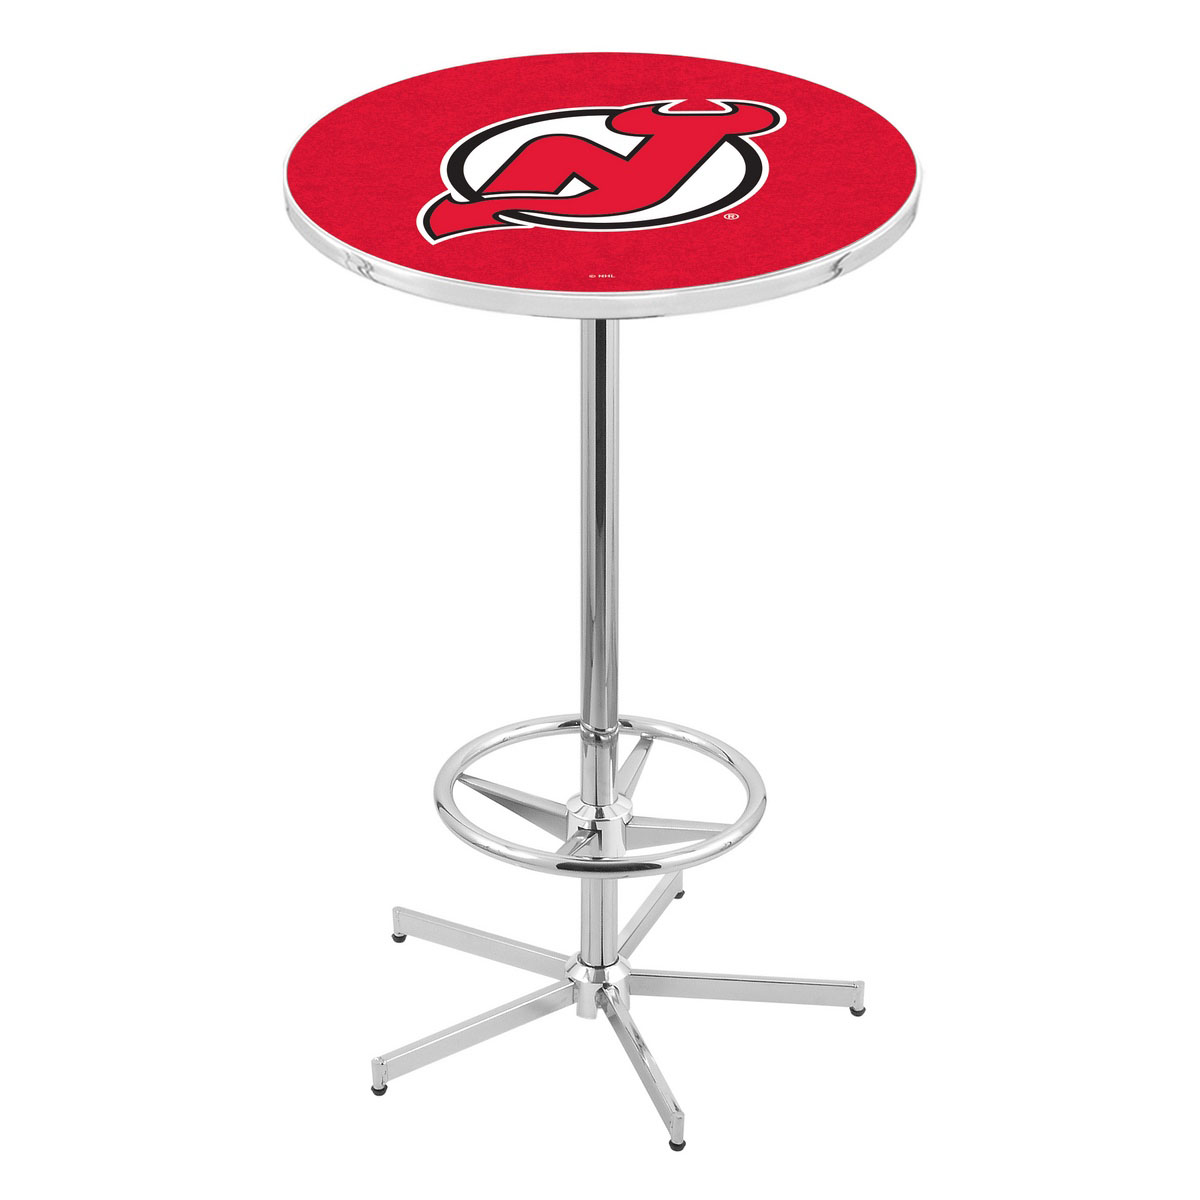 42 Inch Chrome New Jersey Devils Pub Table